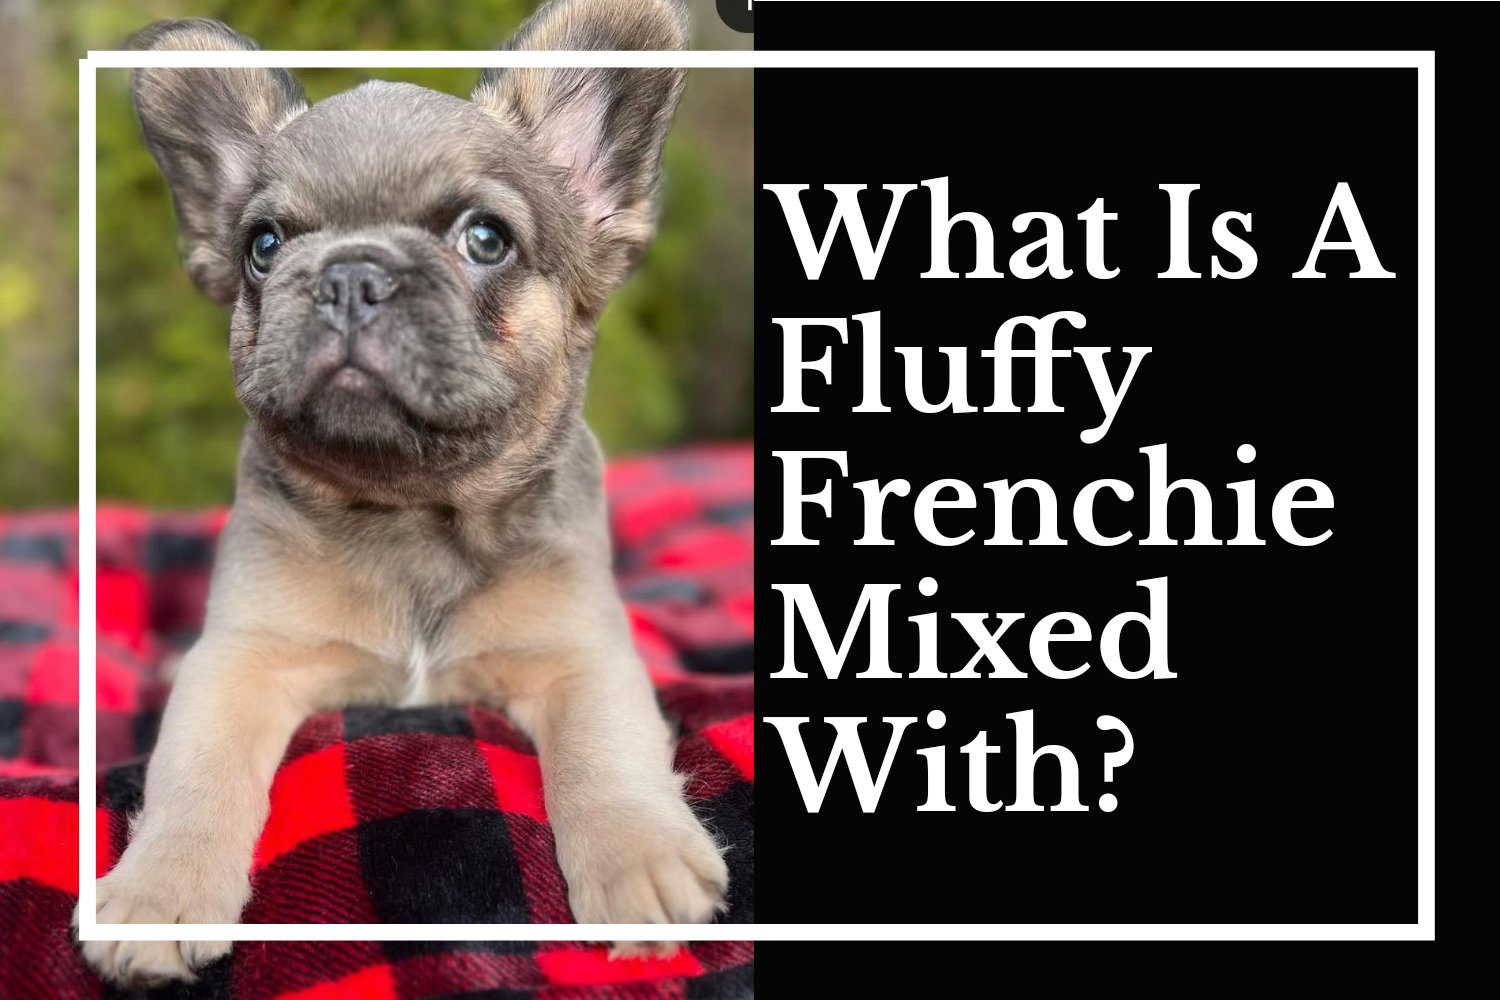 What Is A Fluffy Frenchie Mixed With